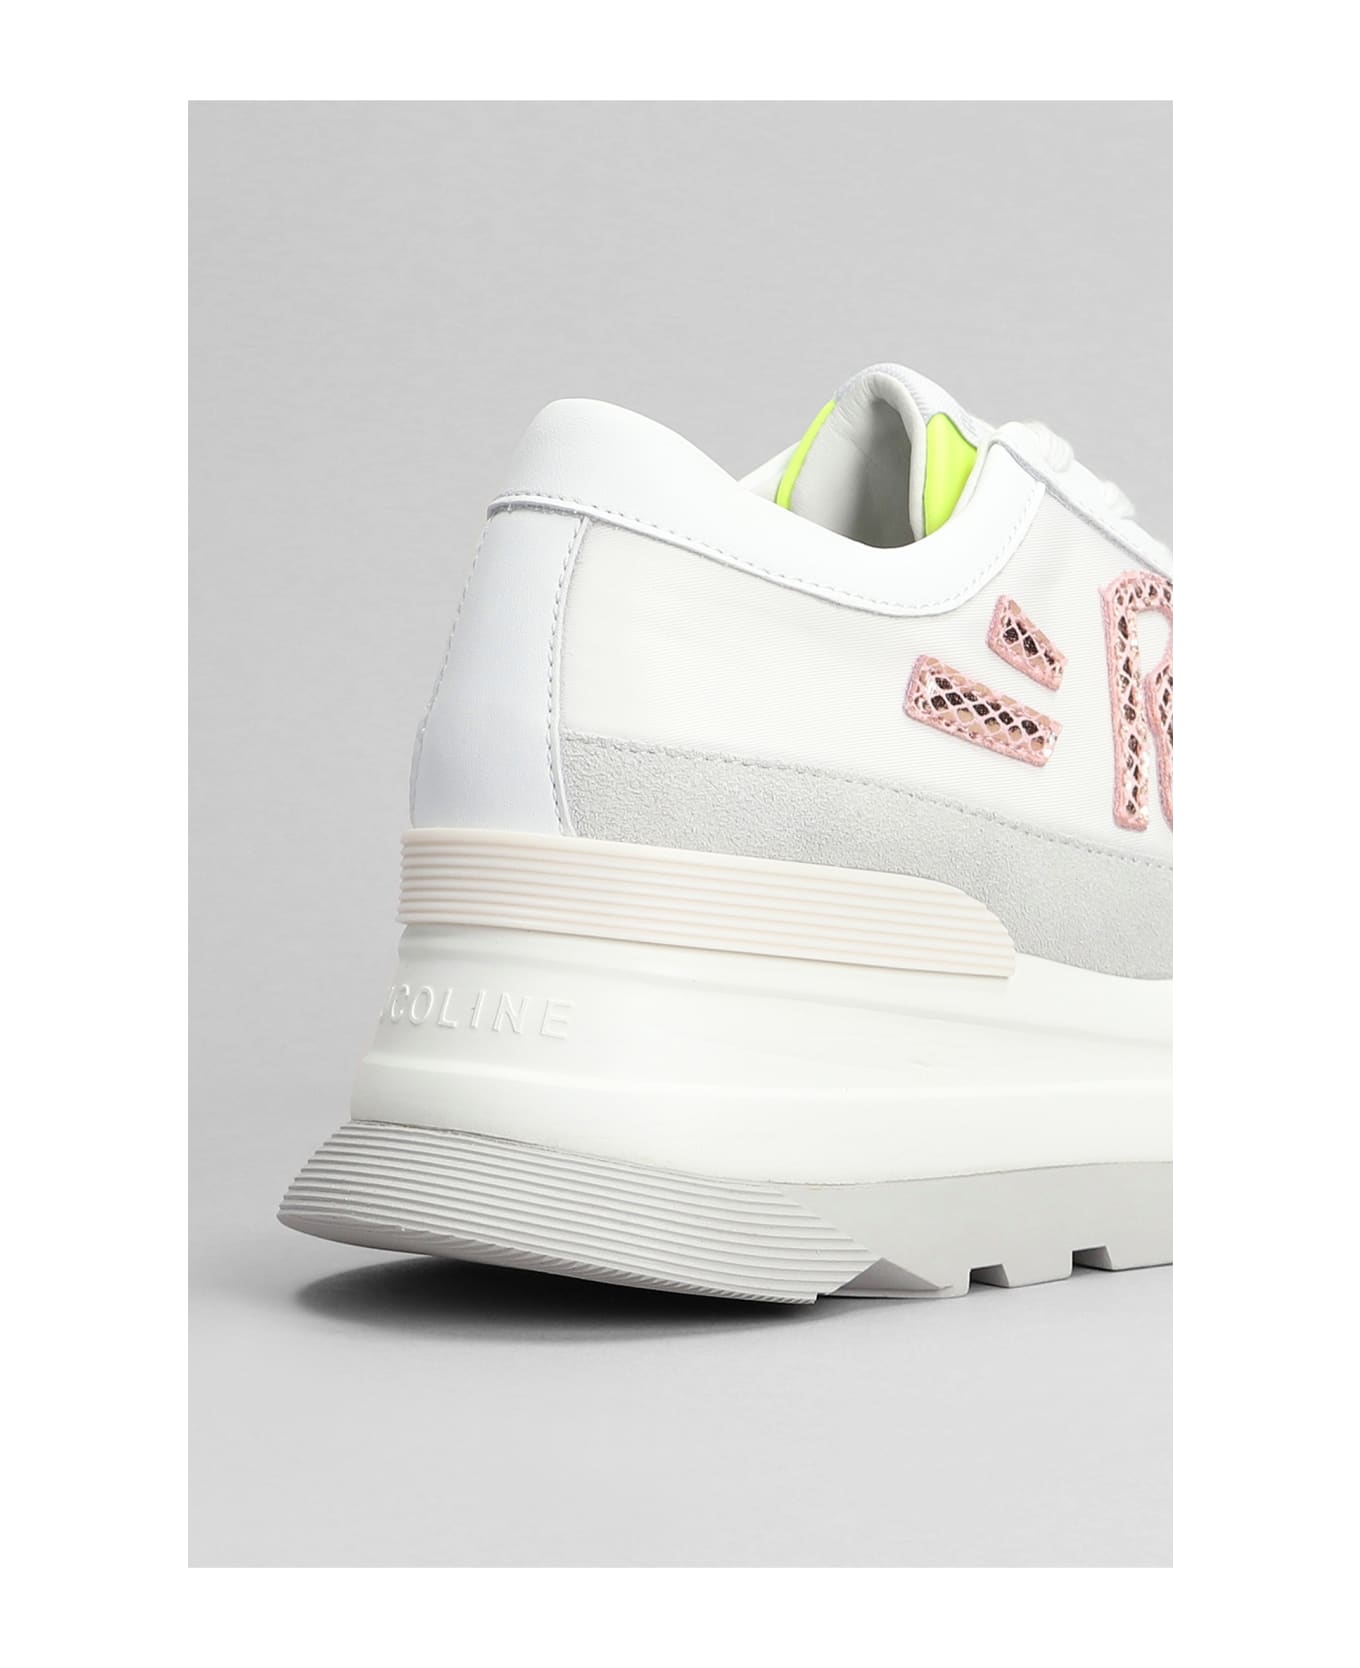 Ruco Line Aki Sneakers In White Suede And Fabric - white